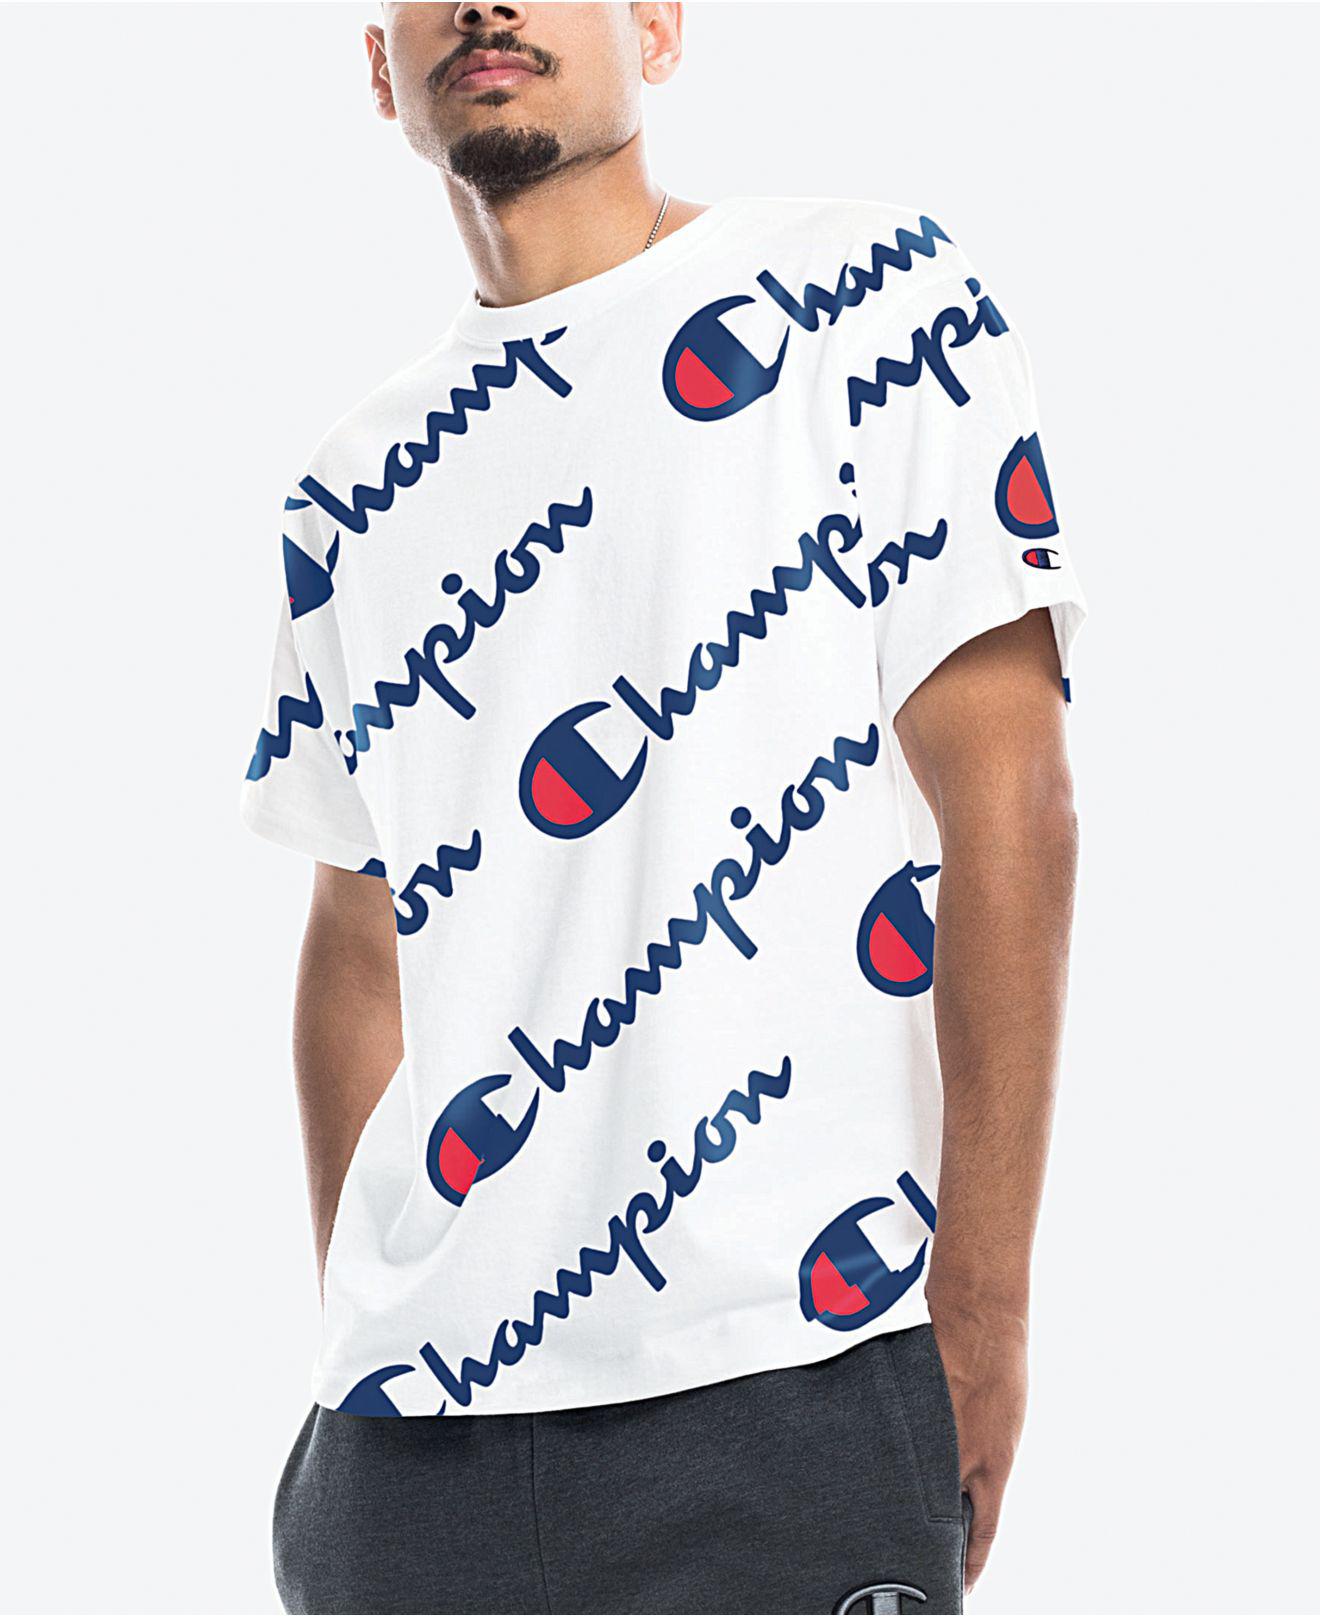 shirt with champion all over it